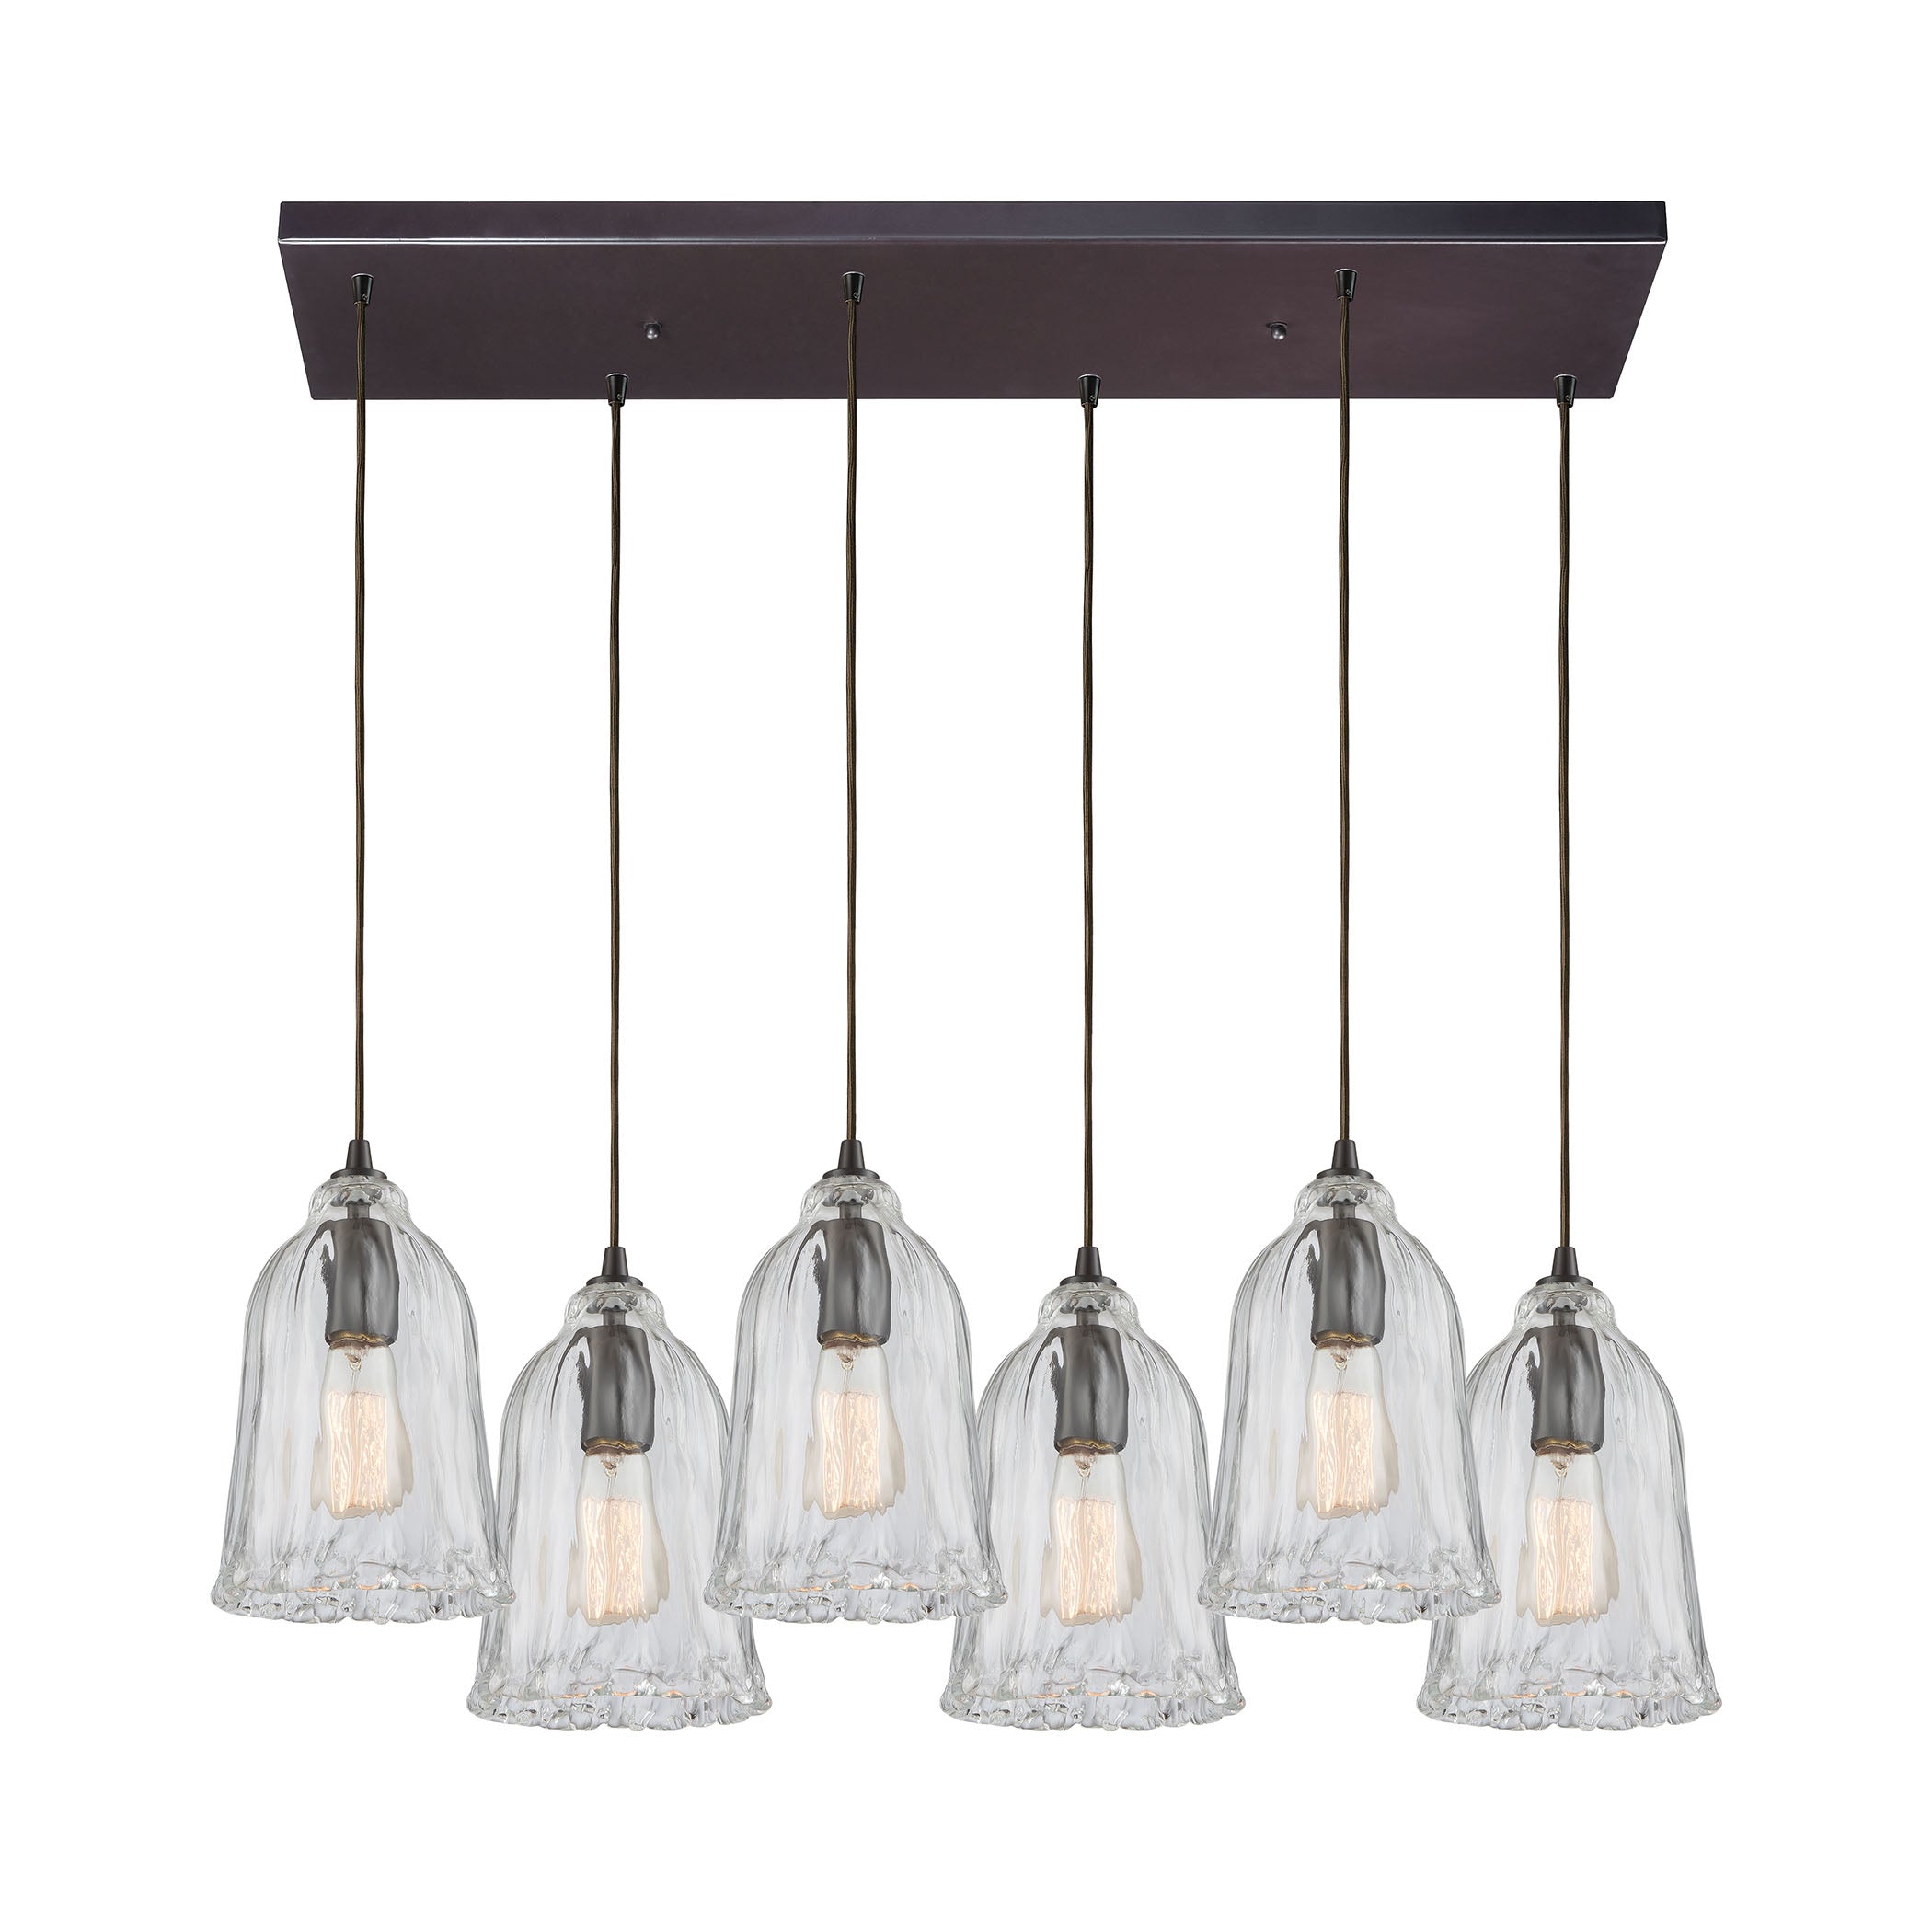 ELK Lighting 10671/6RC Hand Formed Glass 6-Light Rectangular Pendant Fixture in Oiled Bronze with Clear Hand-formed Glass